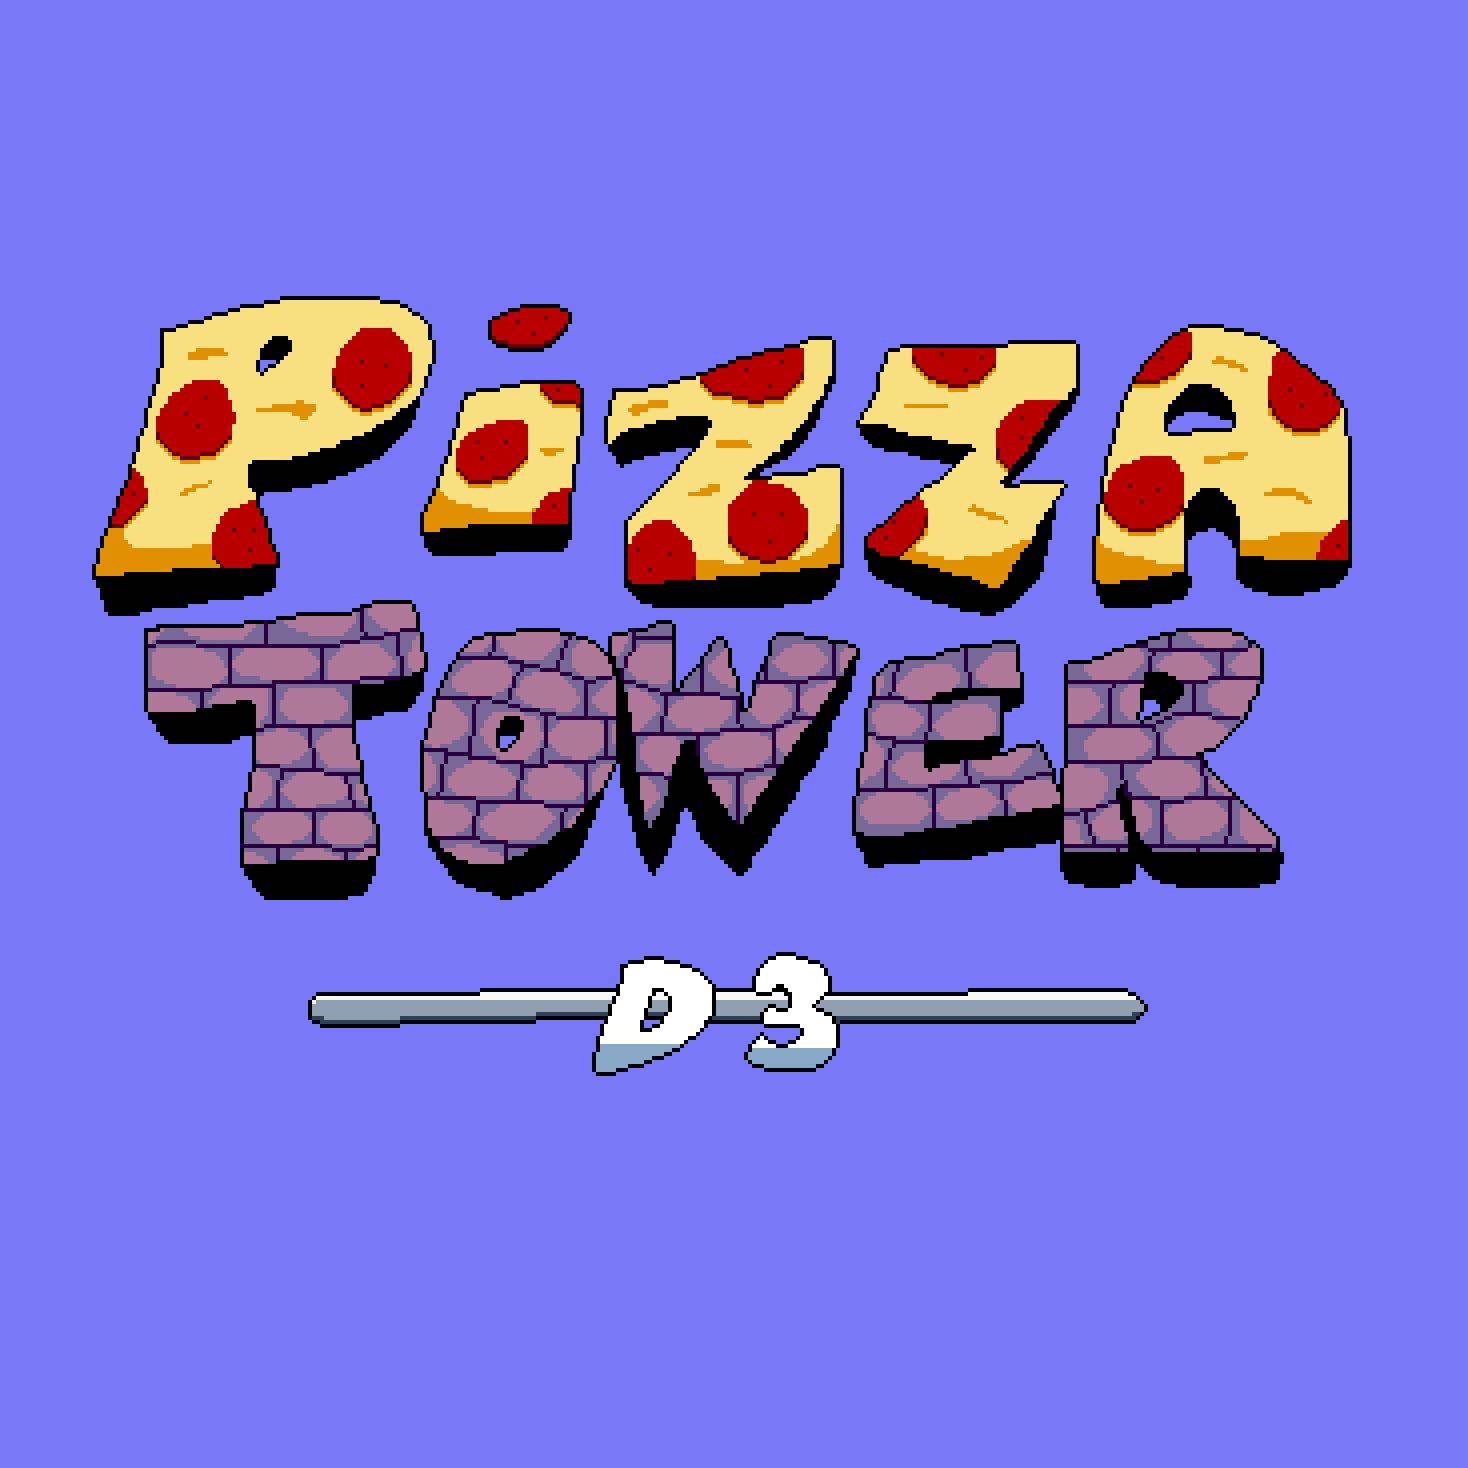 pizza tower patreon